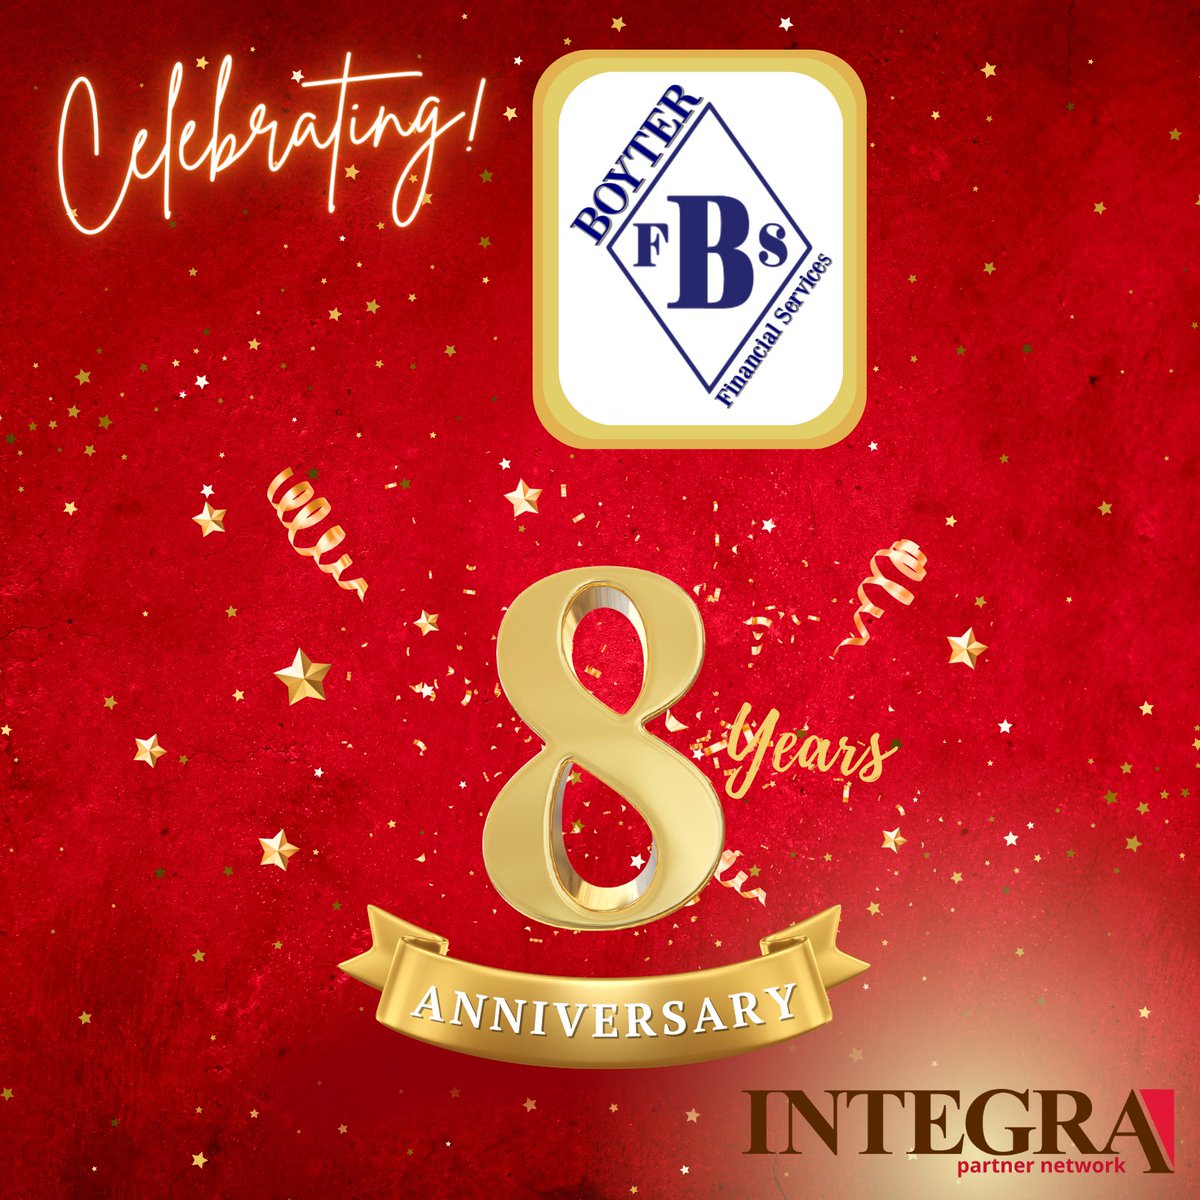 Excited to celebrate 8 years of success with Boyter Financial Services and the Integra Partner Network!

Are you ready to find your way with Integra?

#integrapartnernetwork #independentagent #findyourway #integra #insurance #insuranceagent #insuranceagency #integrainspires